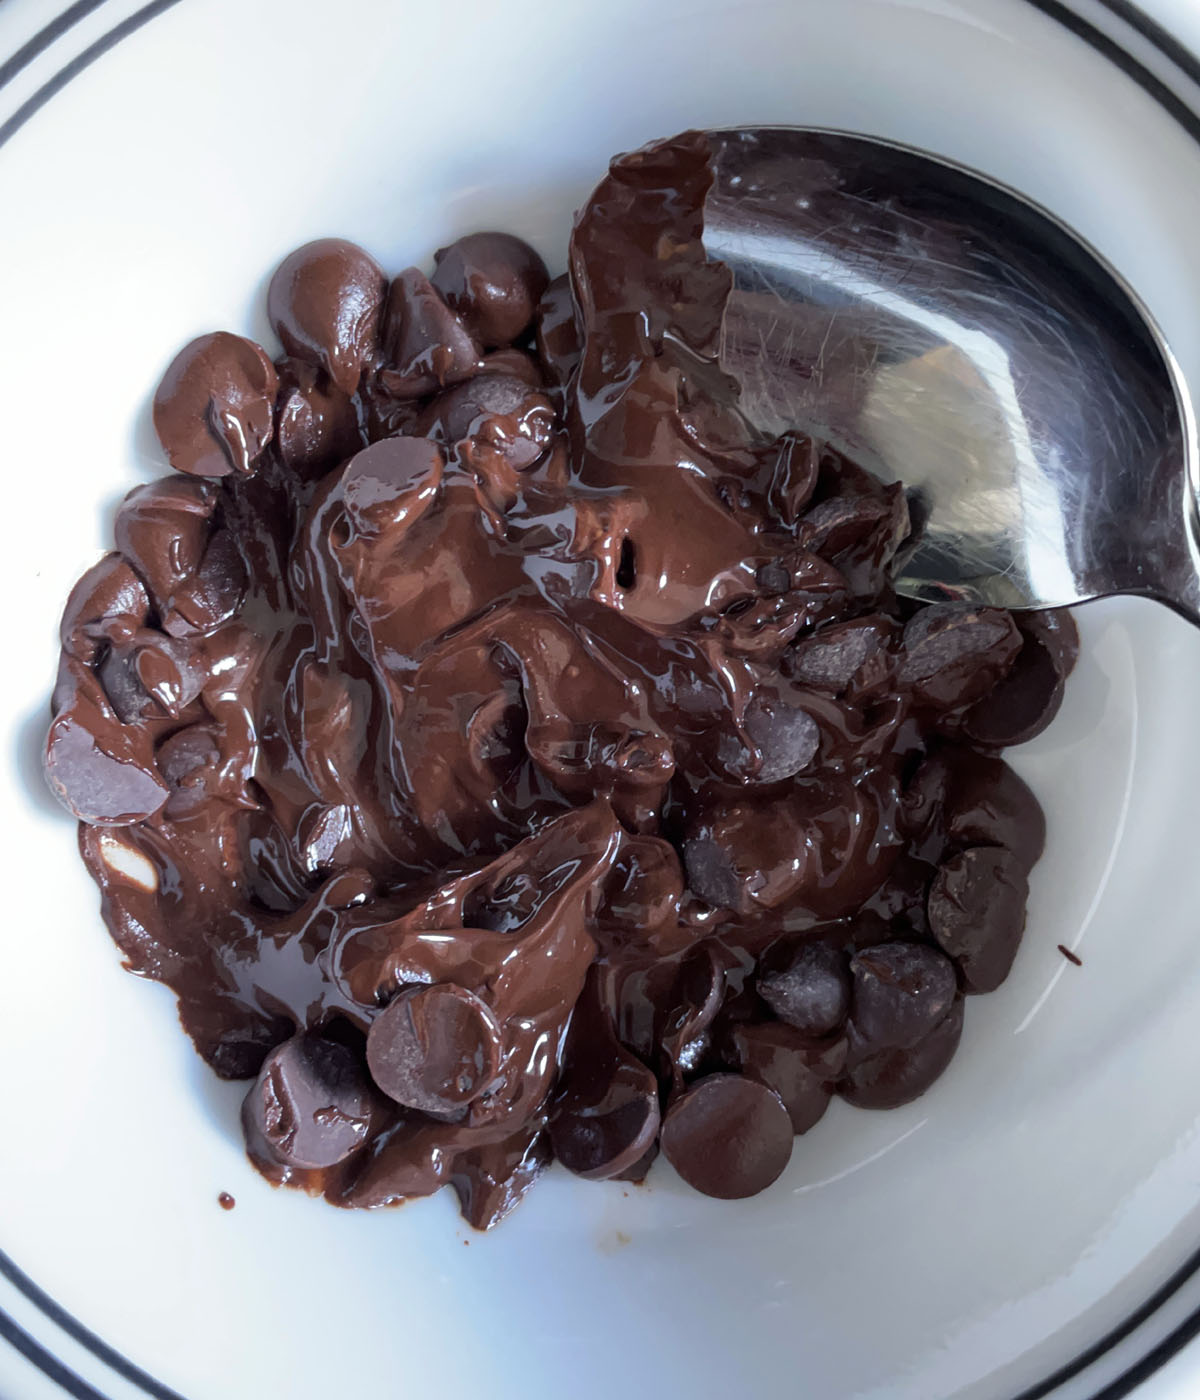 A spoon in a white bowl containing partially melted chocolate chips.